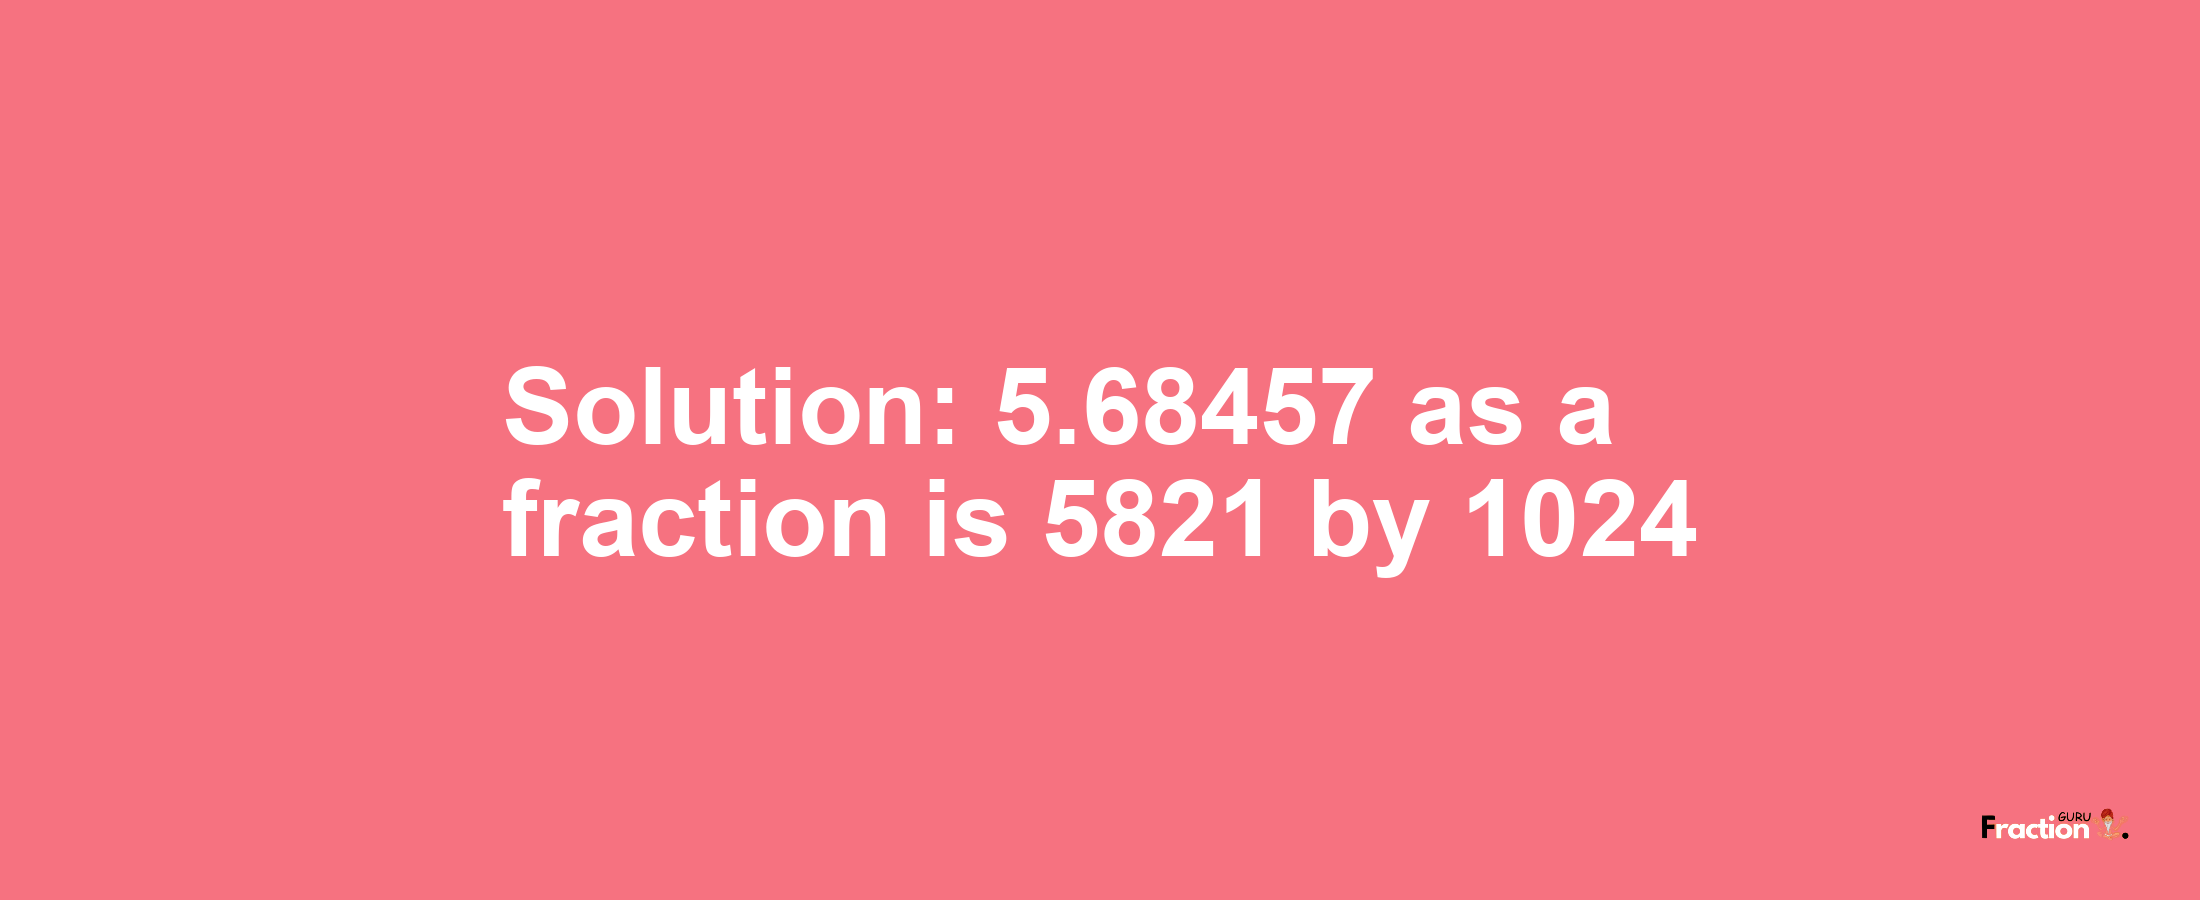 Solution:5.68457 as a fraction is 5821/1024